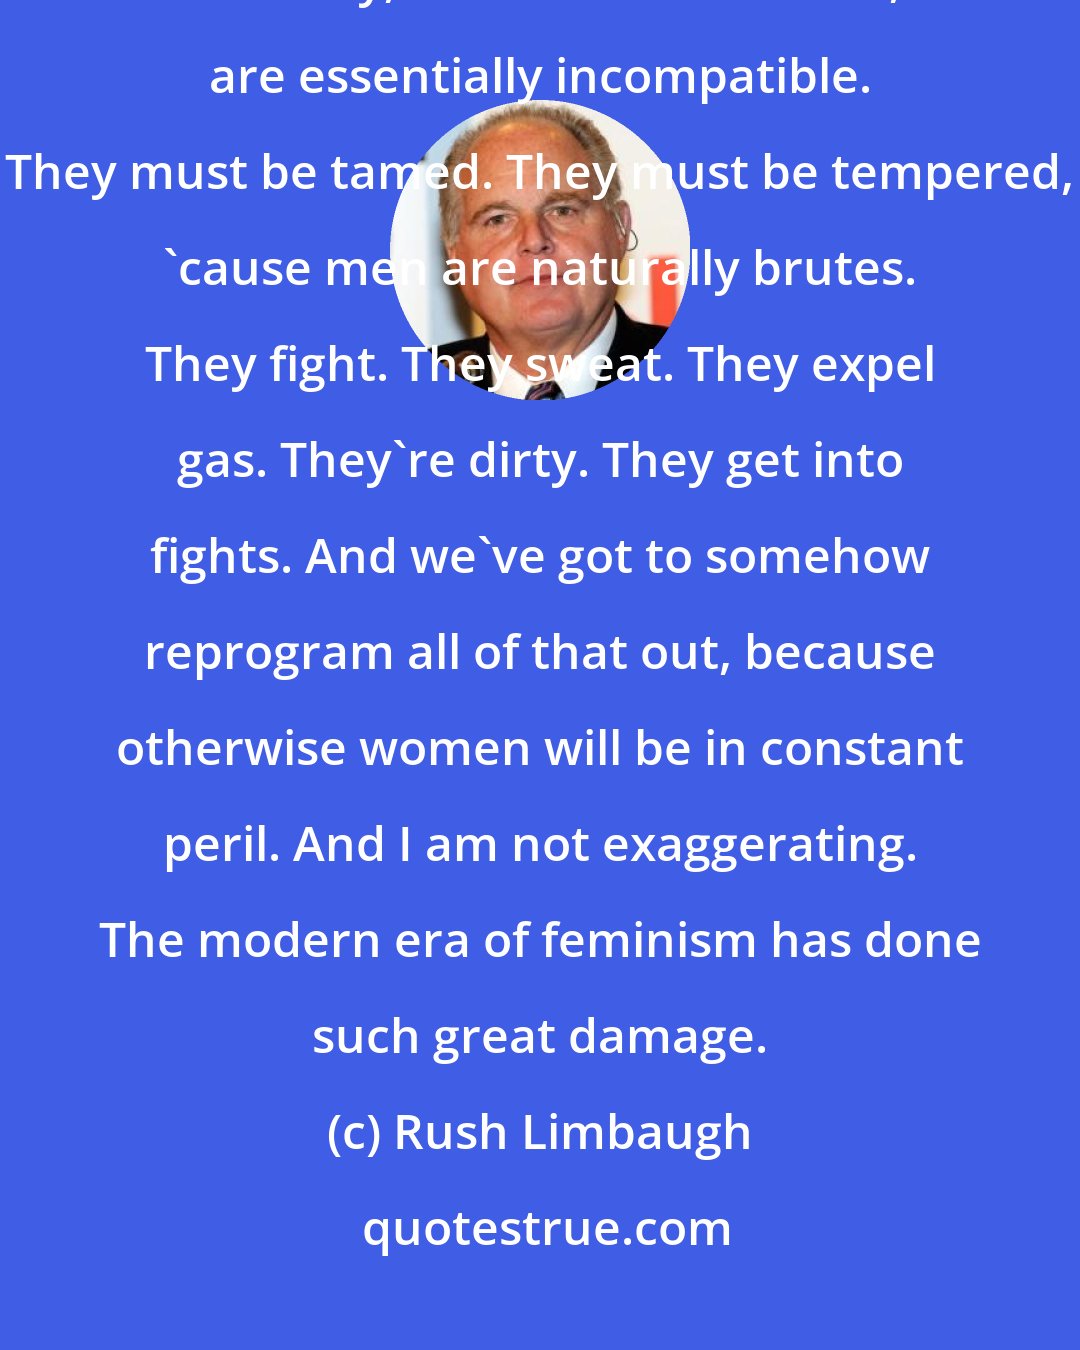 Rush Limbaugh: As far as feminism is concerned be the problem in the world is men, and they, in their natural state, are essentially incompatible. They must be tamed. They must be tempered, 'cause men are naturally brutes. They fight. They sweat. They expel gas. They're dirty. They get into fights. And we've got to somehow reprogram all of that out, because otherwise women will be in constant peril. And I am not exaggerating. The modern era of feminism has done such great damage.